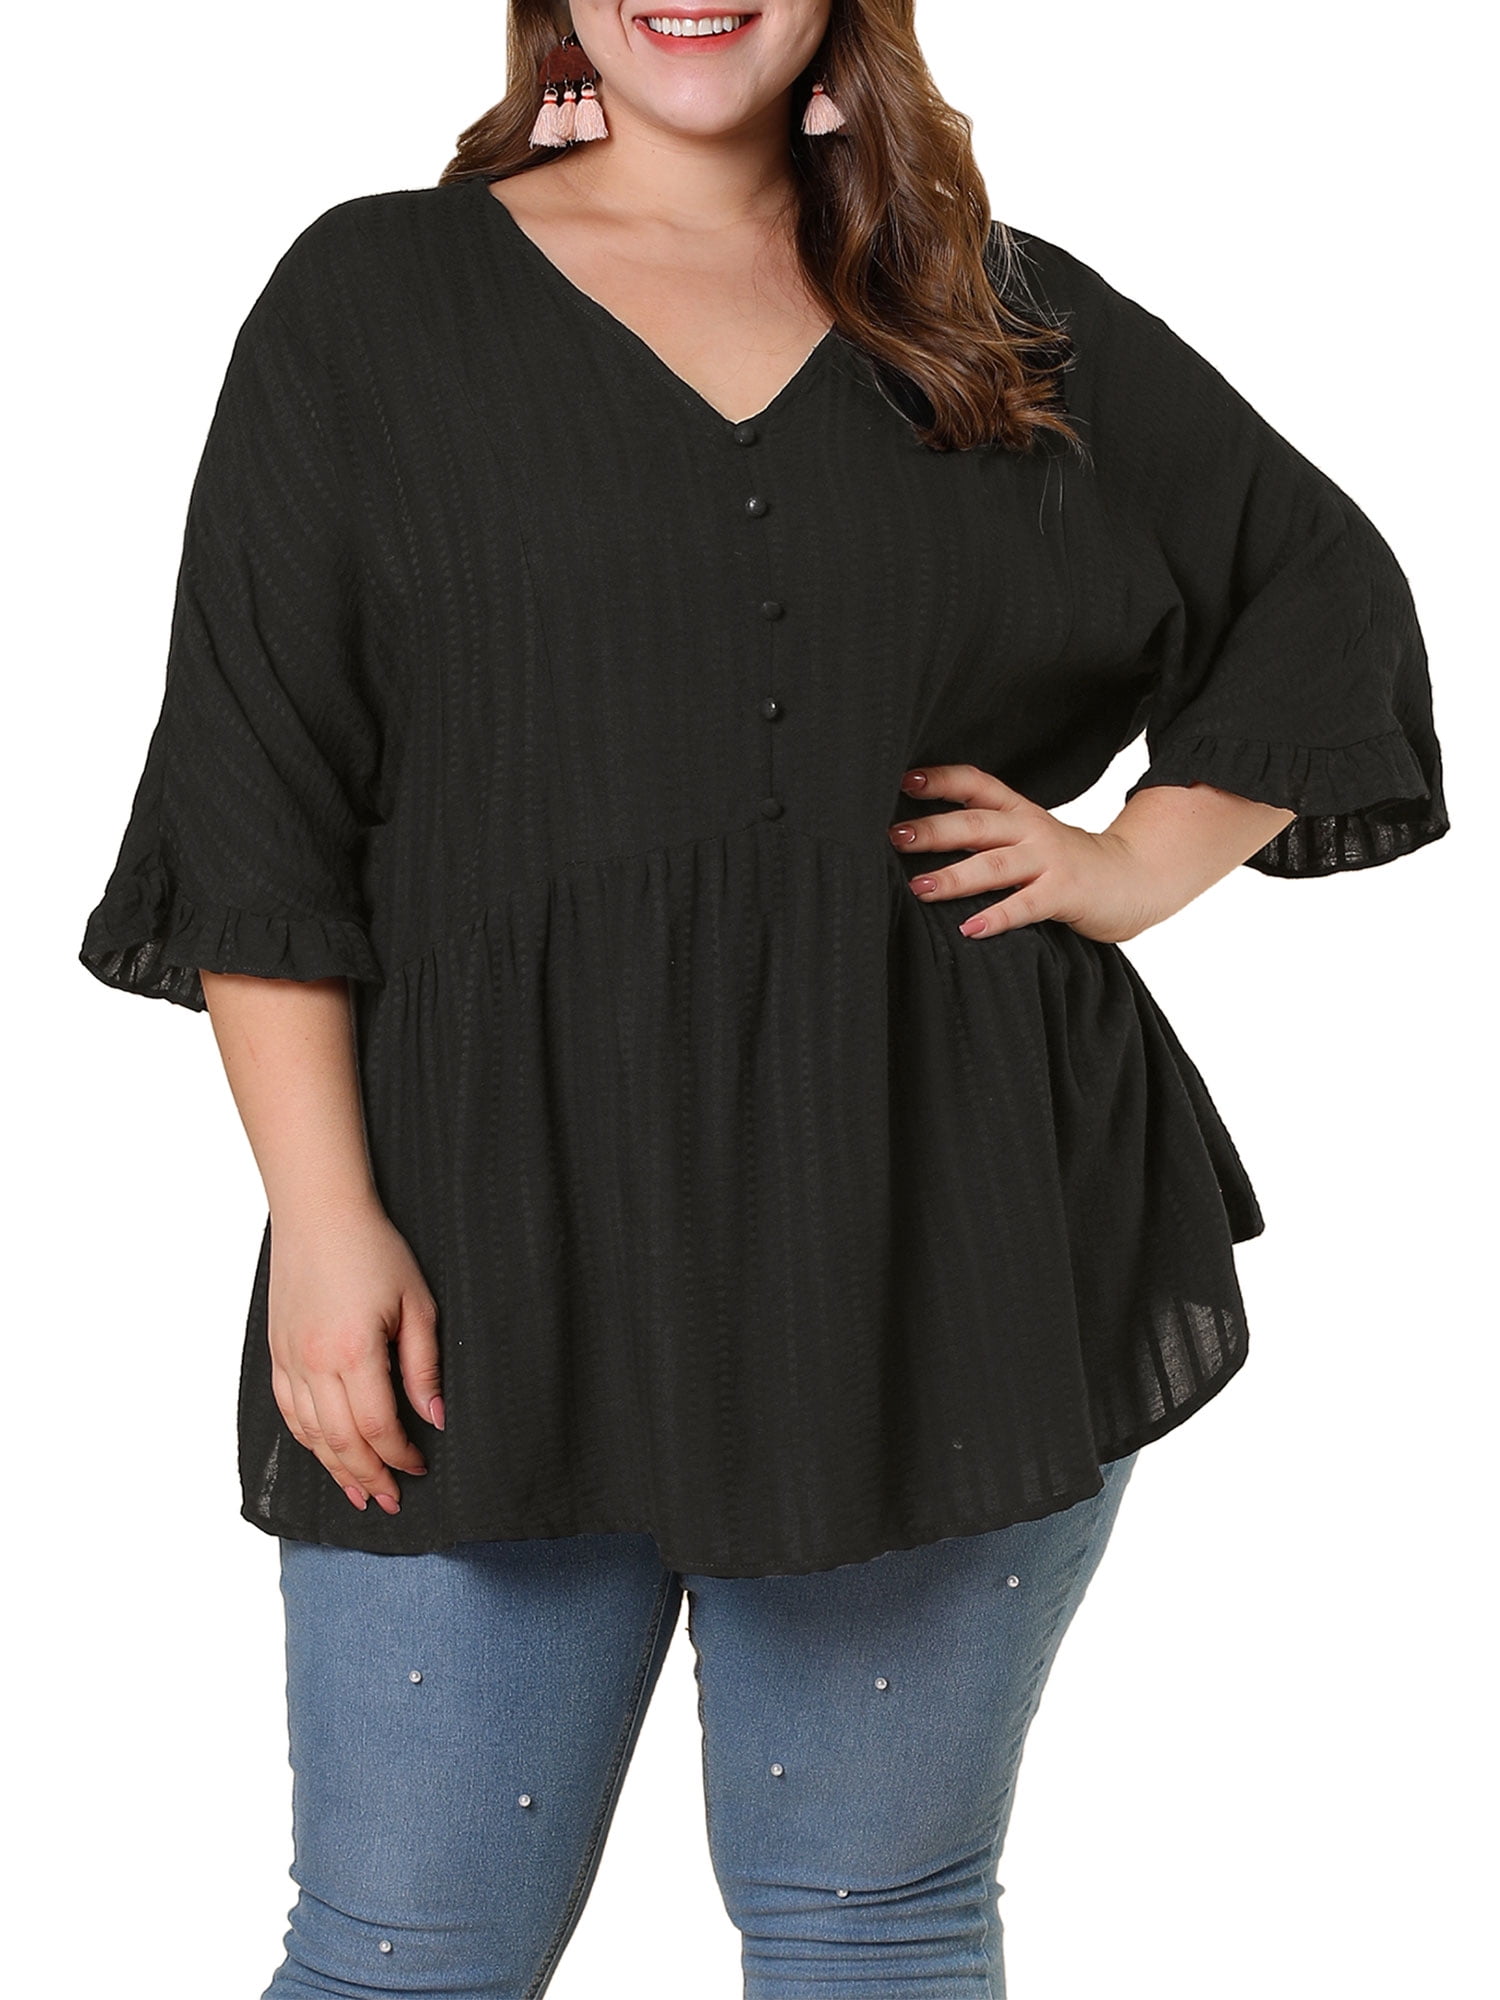 Paper Tee Womens Plus-Size V-Neck 3/4 Sleeve Drape Front Top